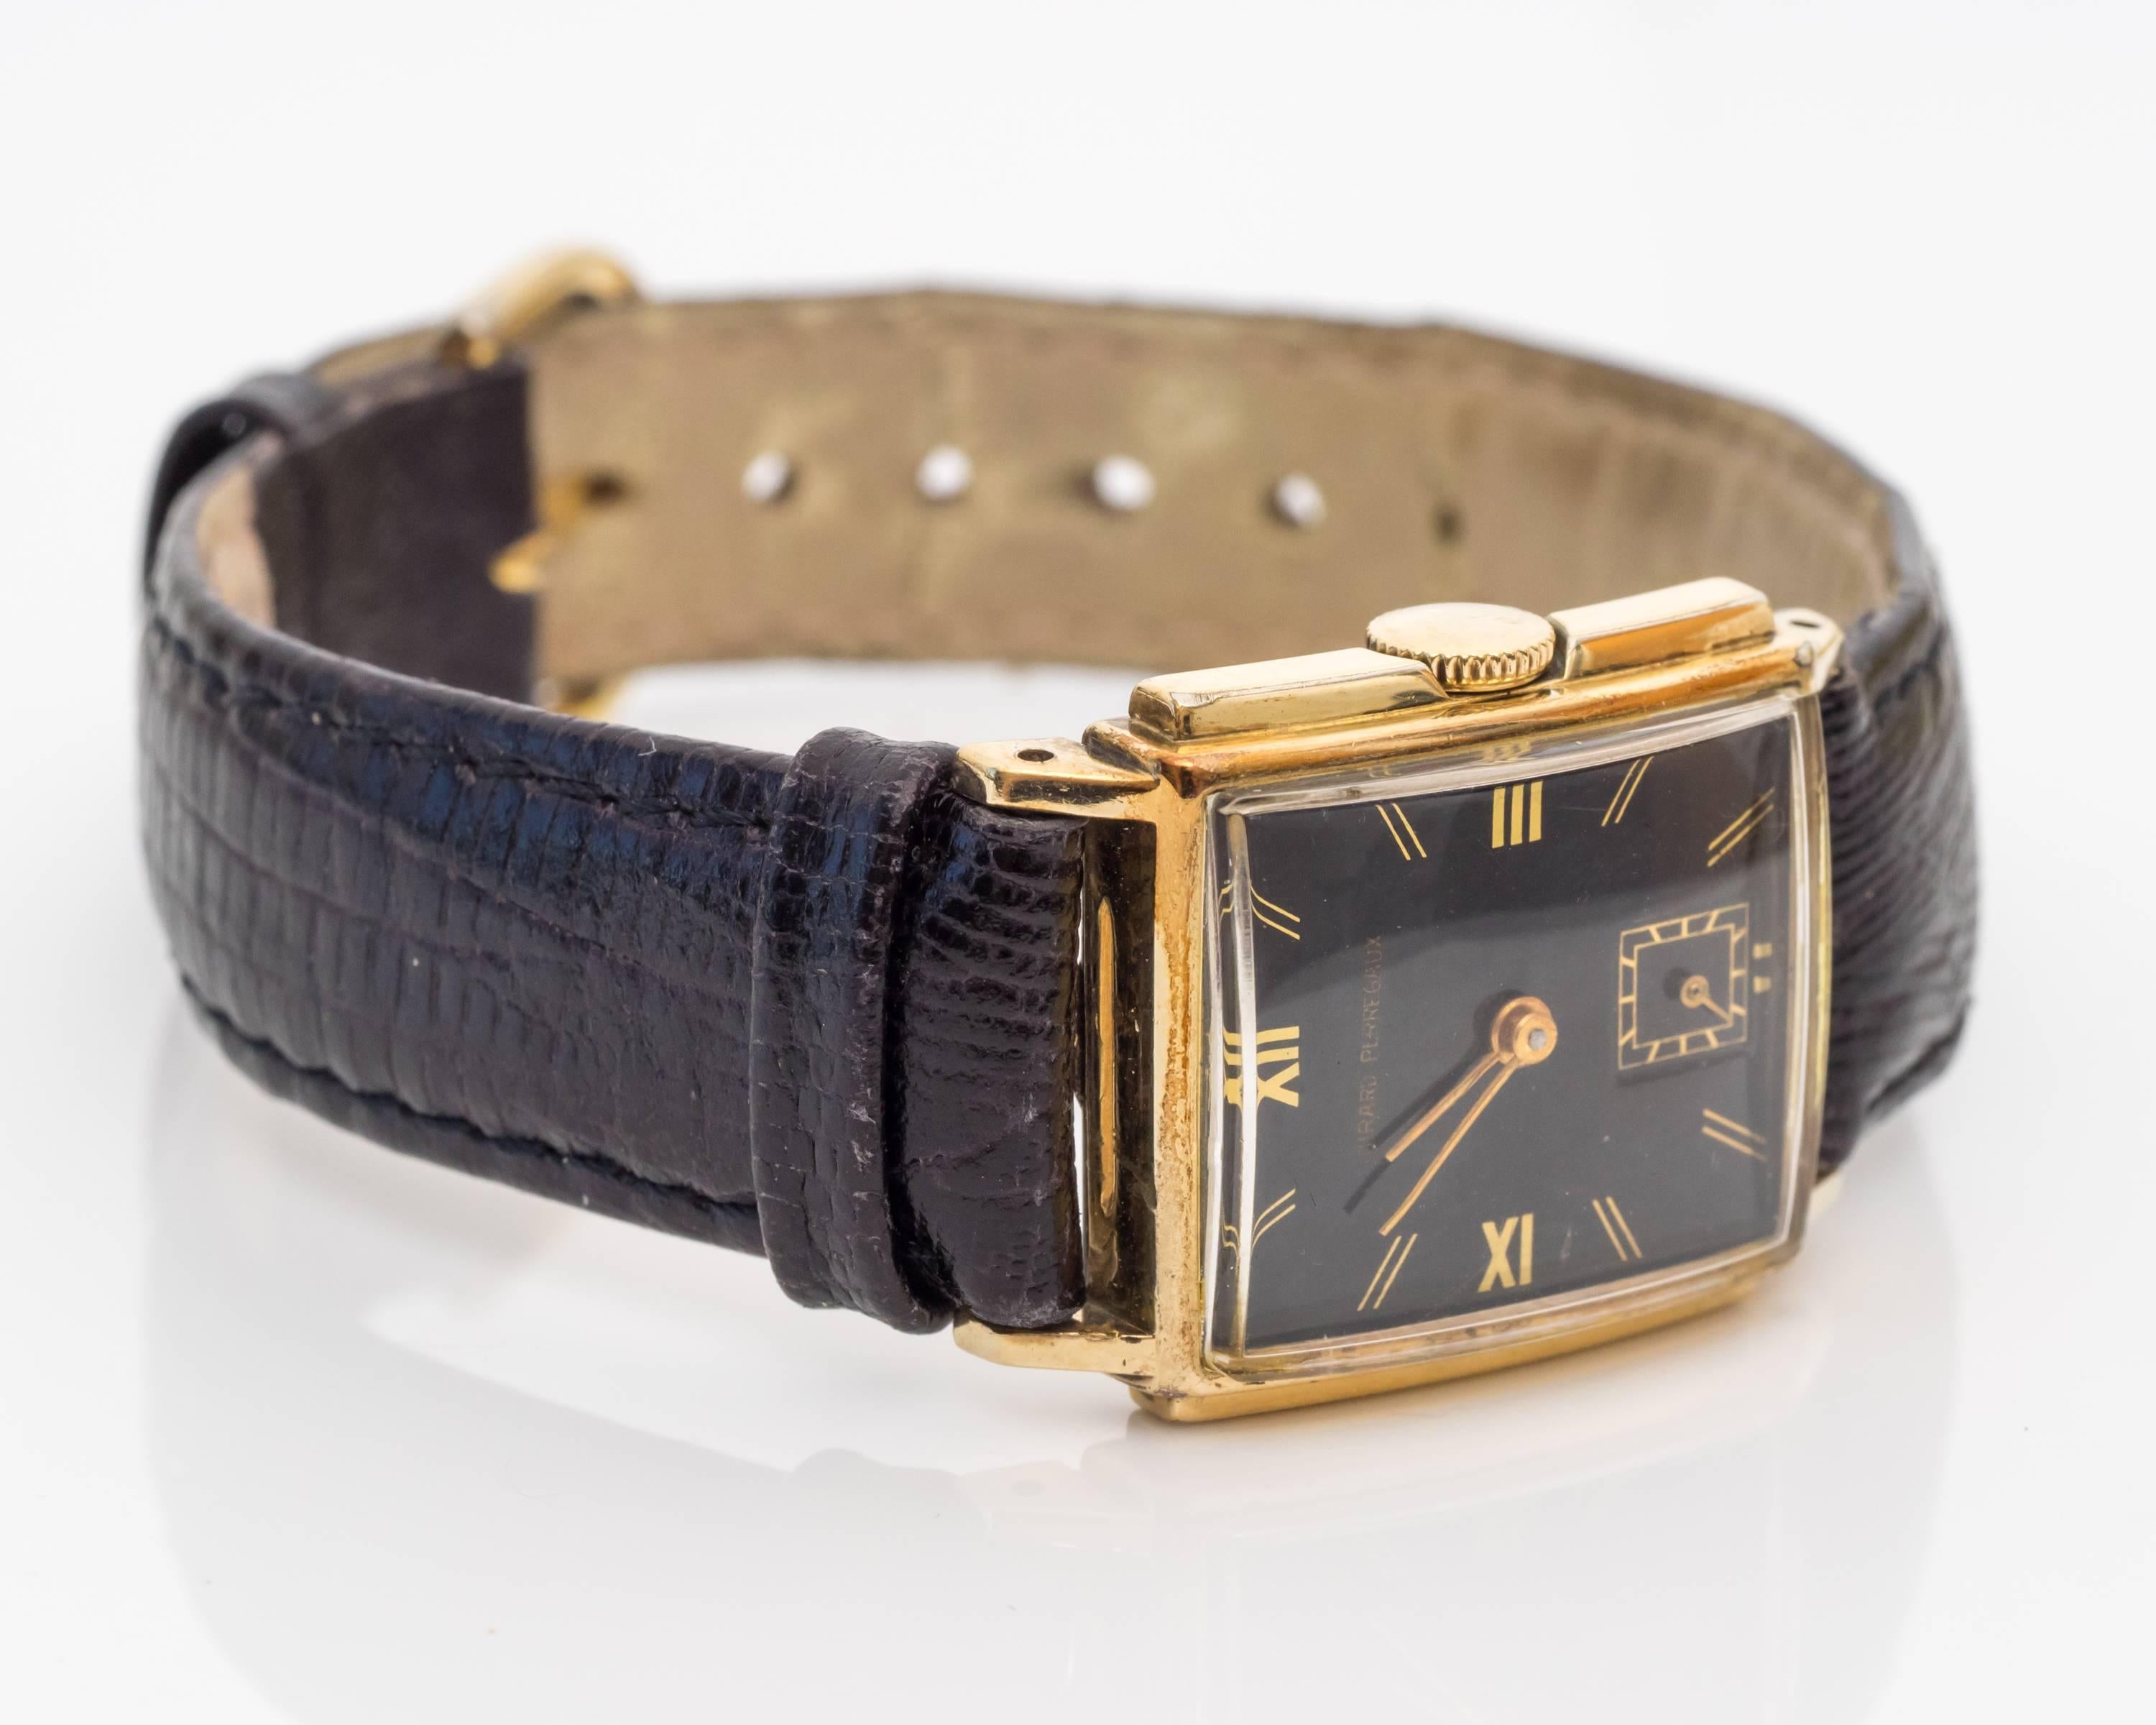 Designer wristwatch, Girard Perregaux 
Simple watch but bold with its roman numeral markers and sleek gold frame
Roman numerals are placed on the "12," "9" and "3" markers. The rest of the numbers are represented by